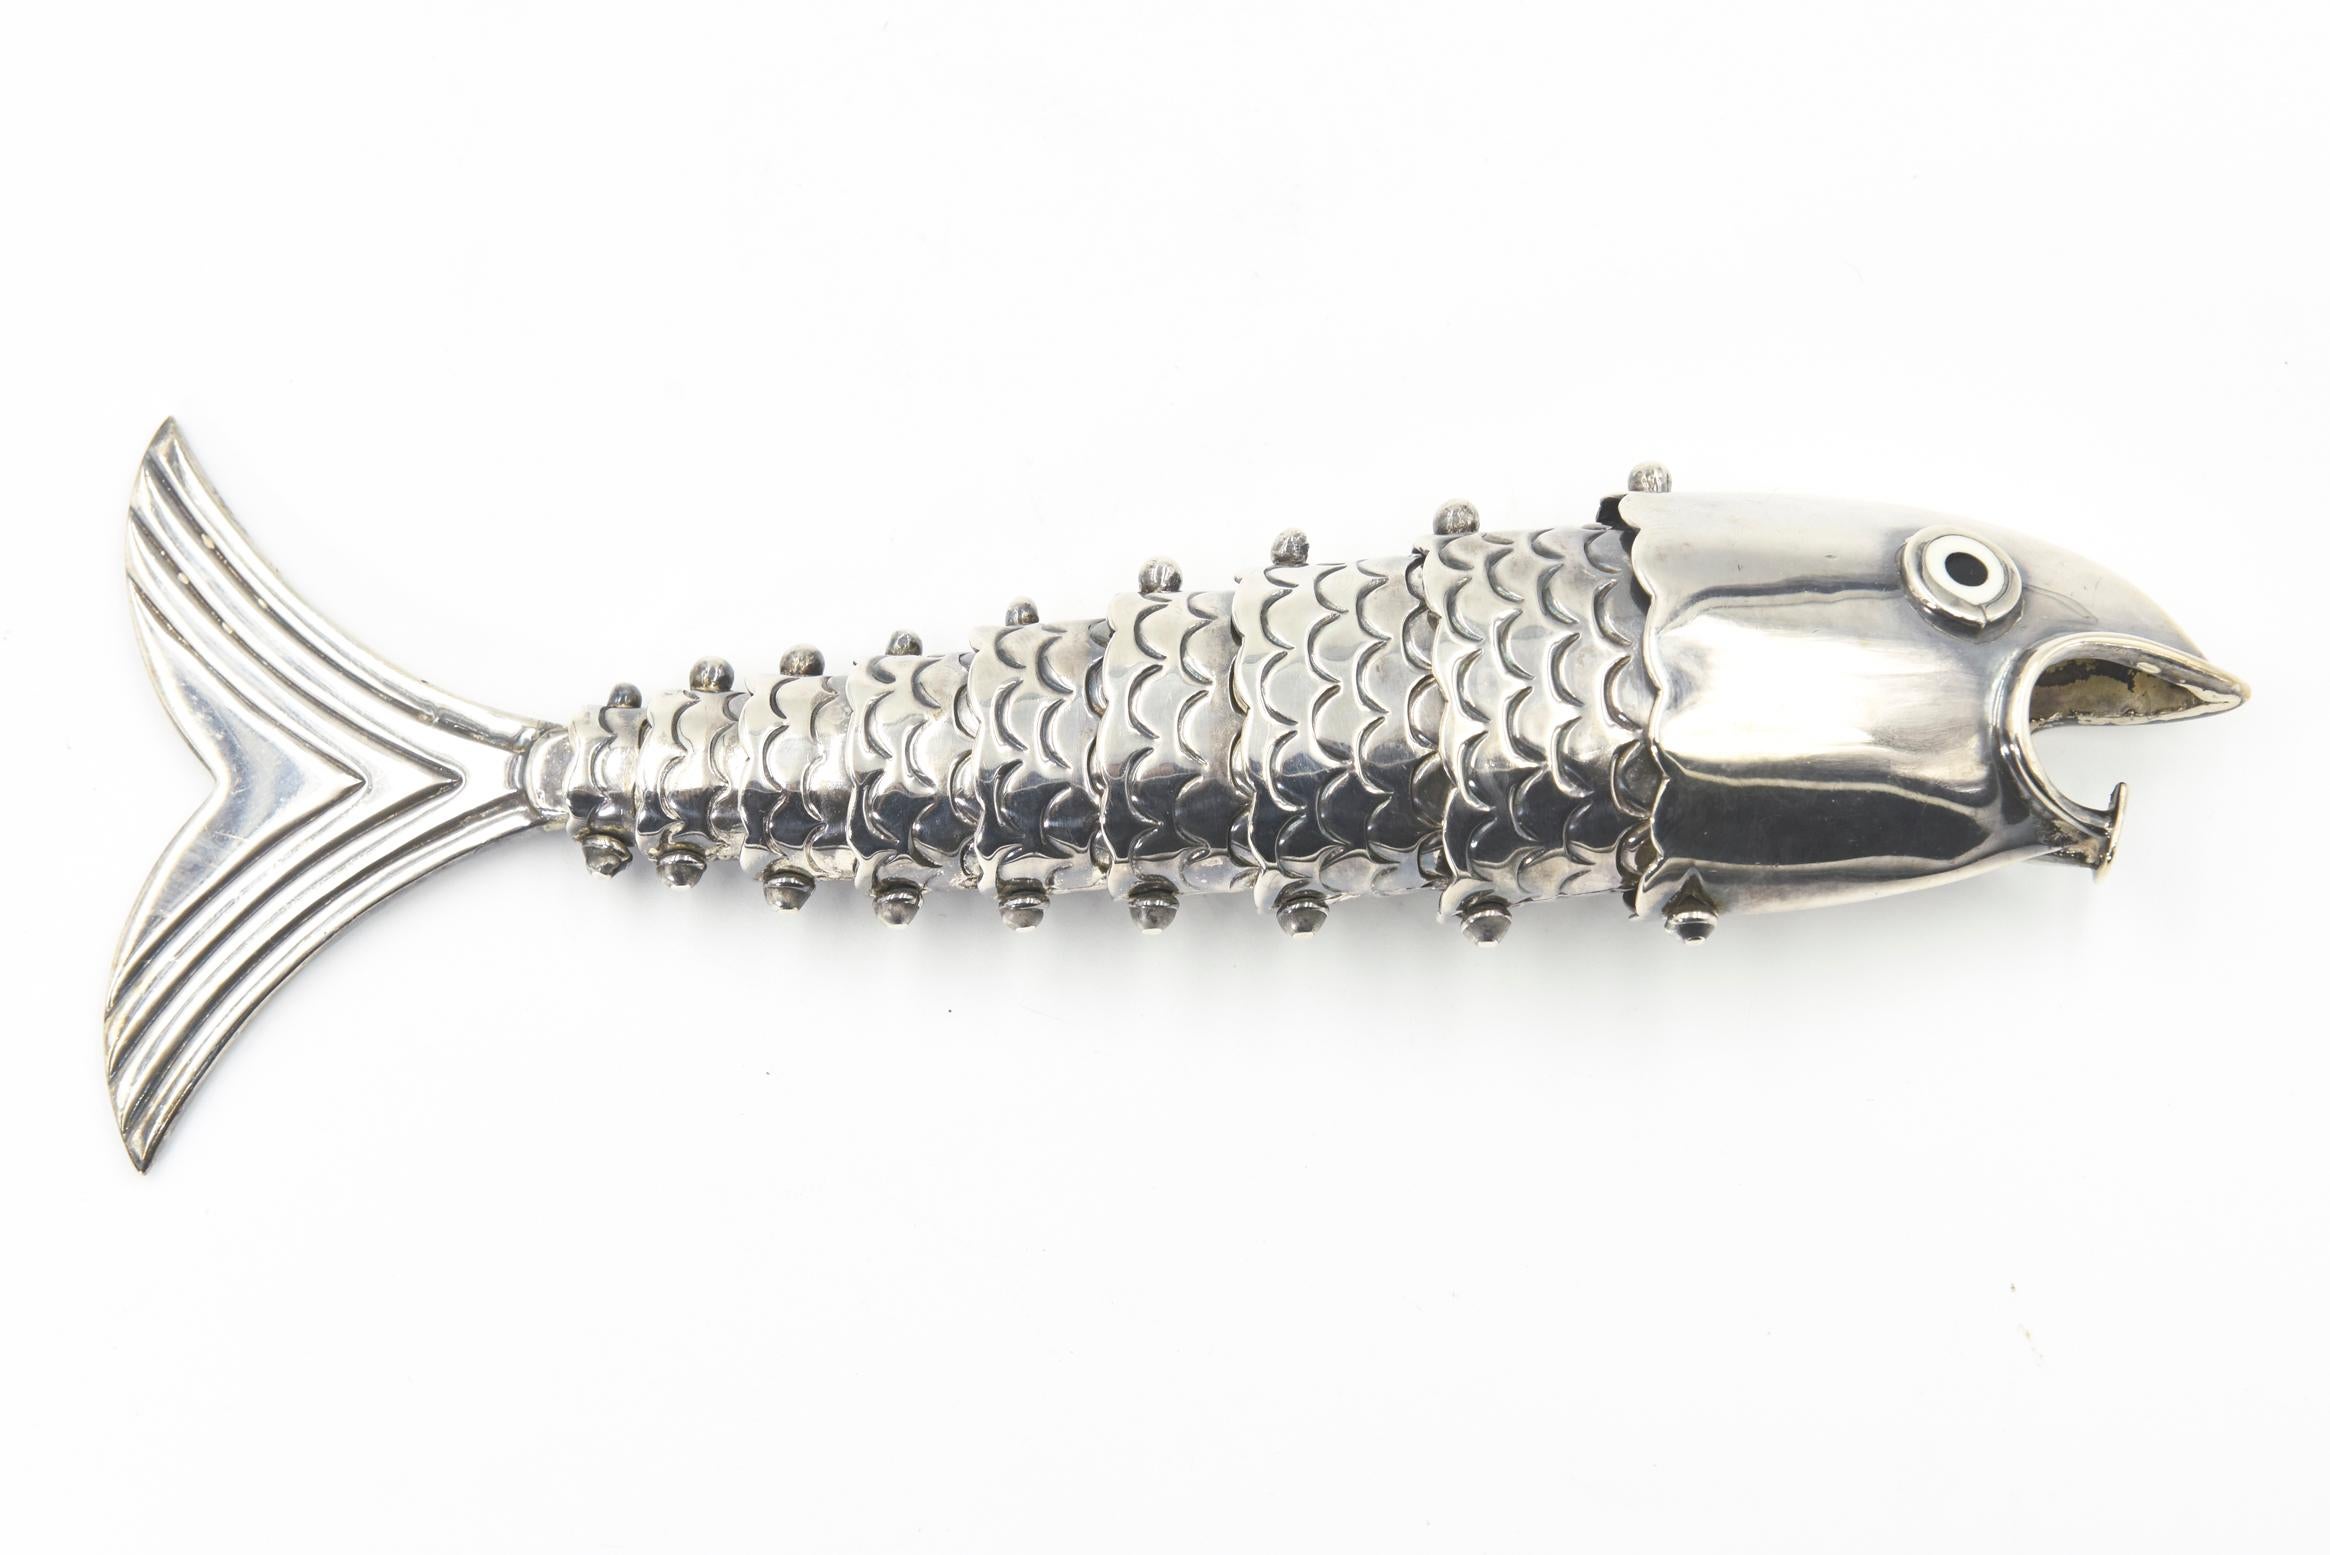 Los Castillo Mexican silver plated articulated fish bottle opener. This is a gorgeous articulated bottle opener is made to look like a fish. This piece features so much detail, as evidenced by the scales and the 10 articulated pieces that allow it